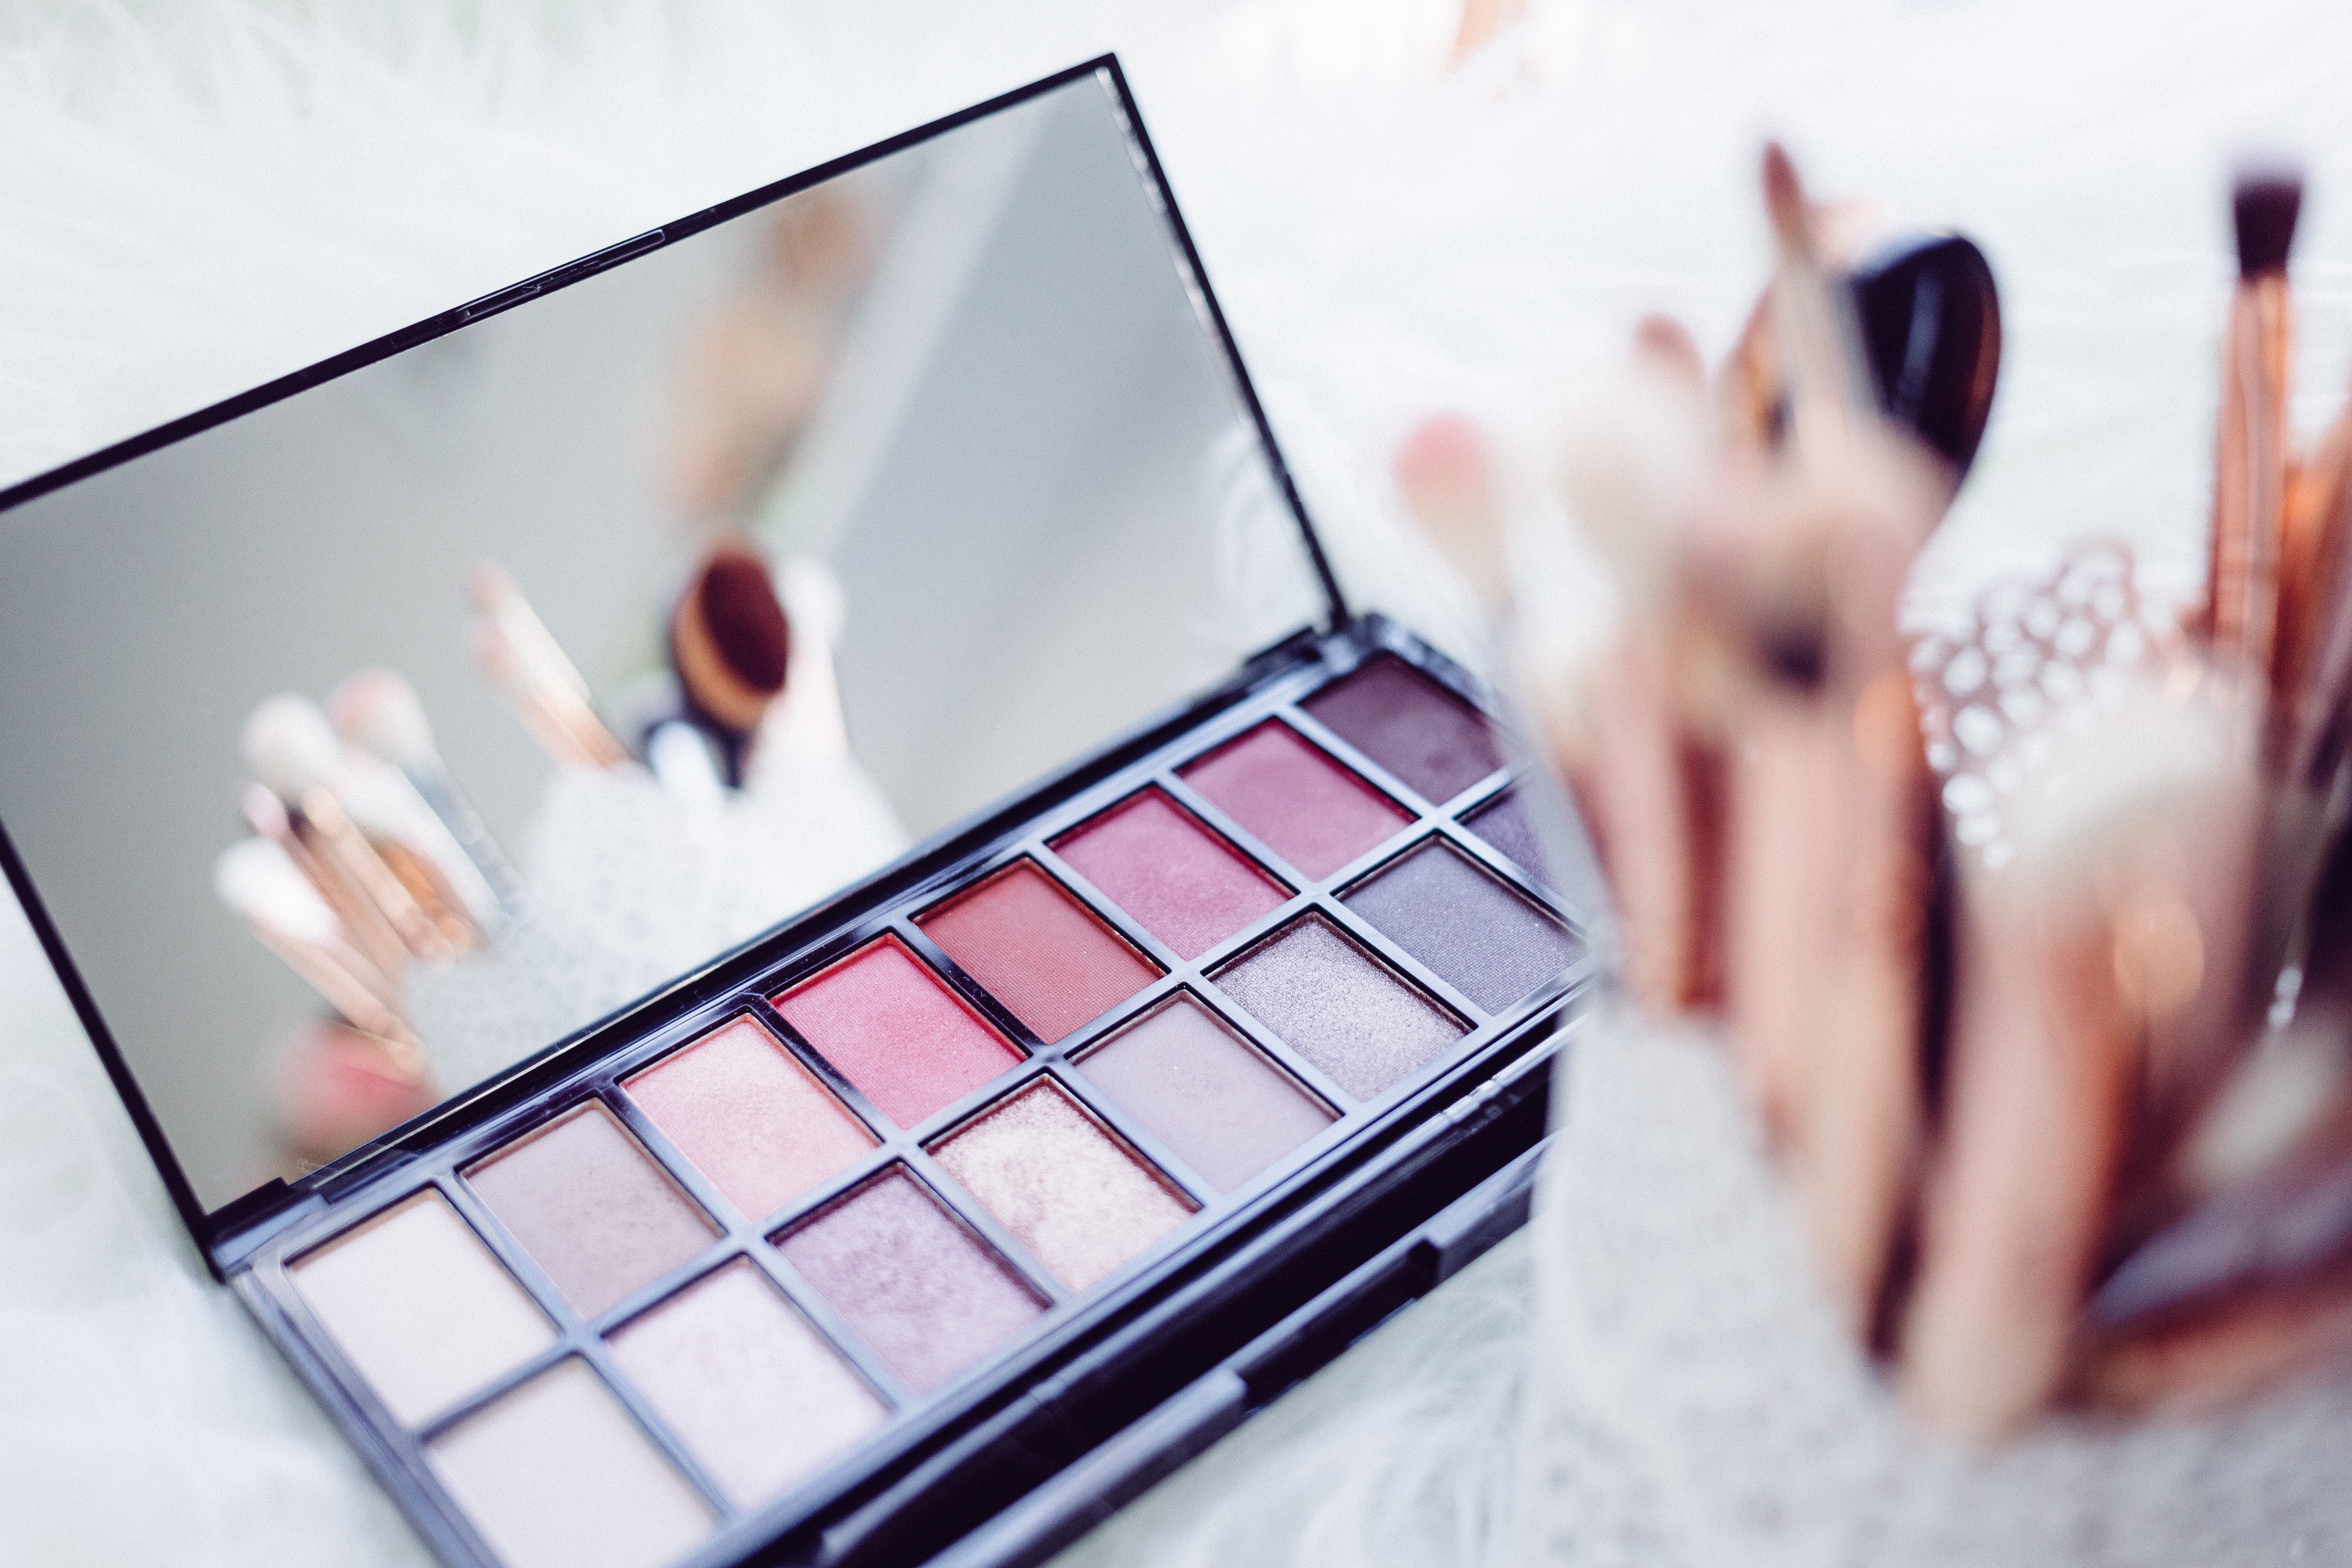 Find Hair And Makeup Artists in   Byron Bay Get the best prices from 2,000+ of the most reviewed Hair And Makeup Artists  near Byron Bay. Pick from mobile stylists or salons.